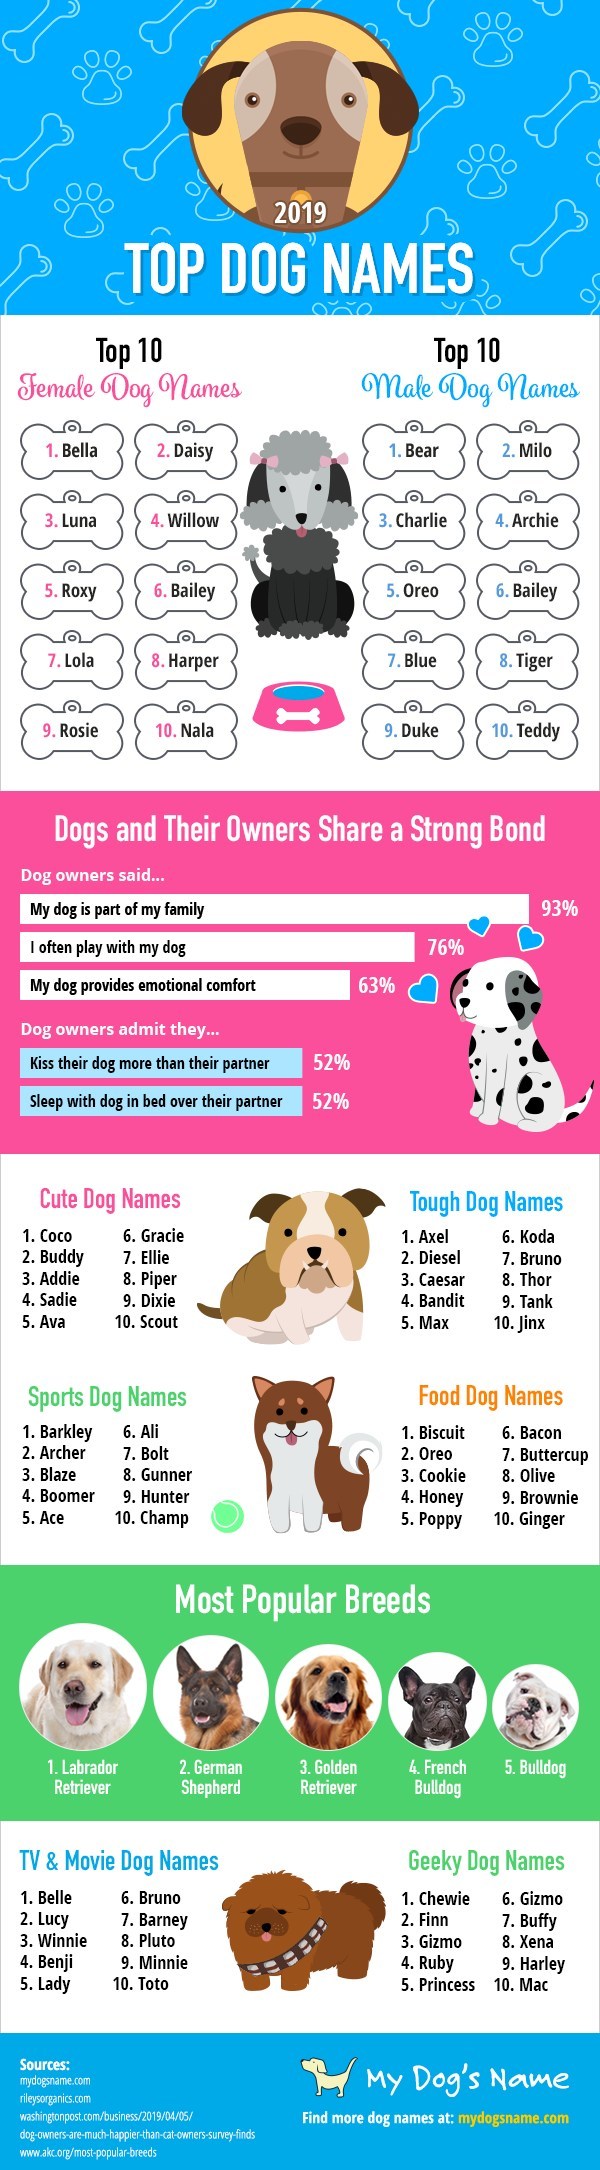 An Infographic Of The Top Dog Names Of 2019 According To My Dog'S Name